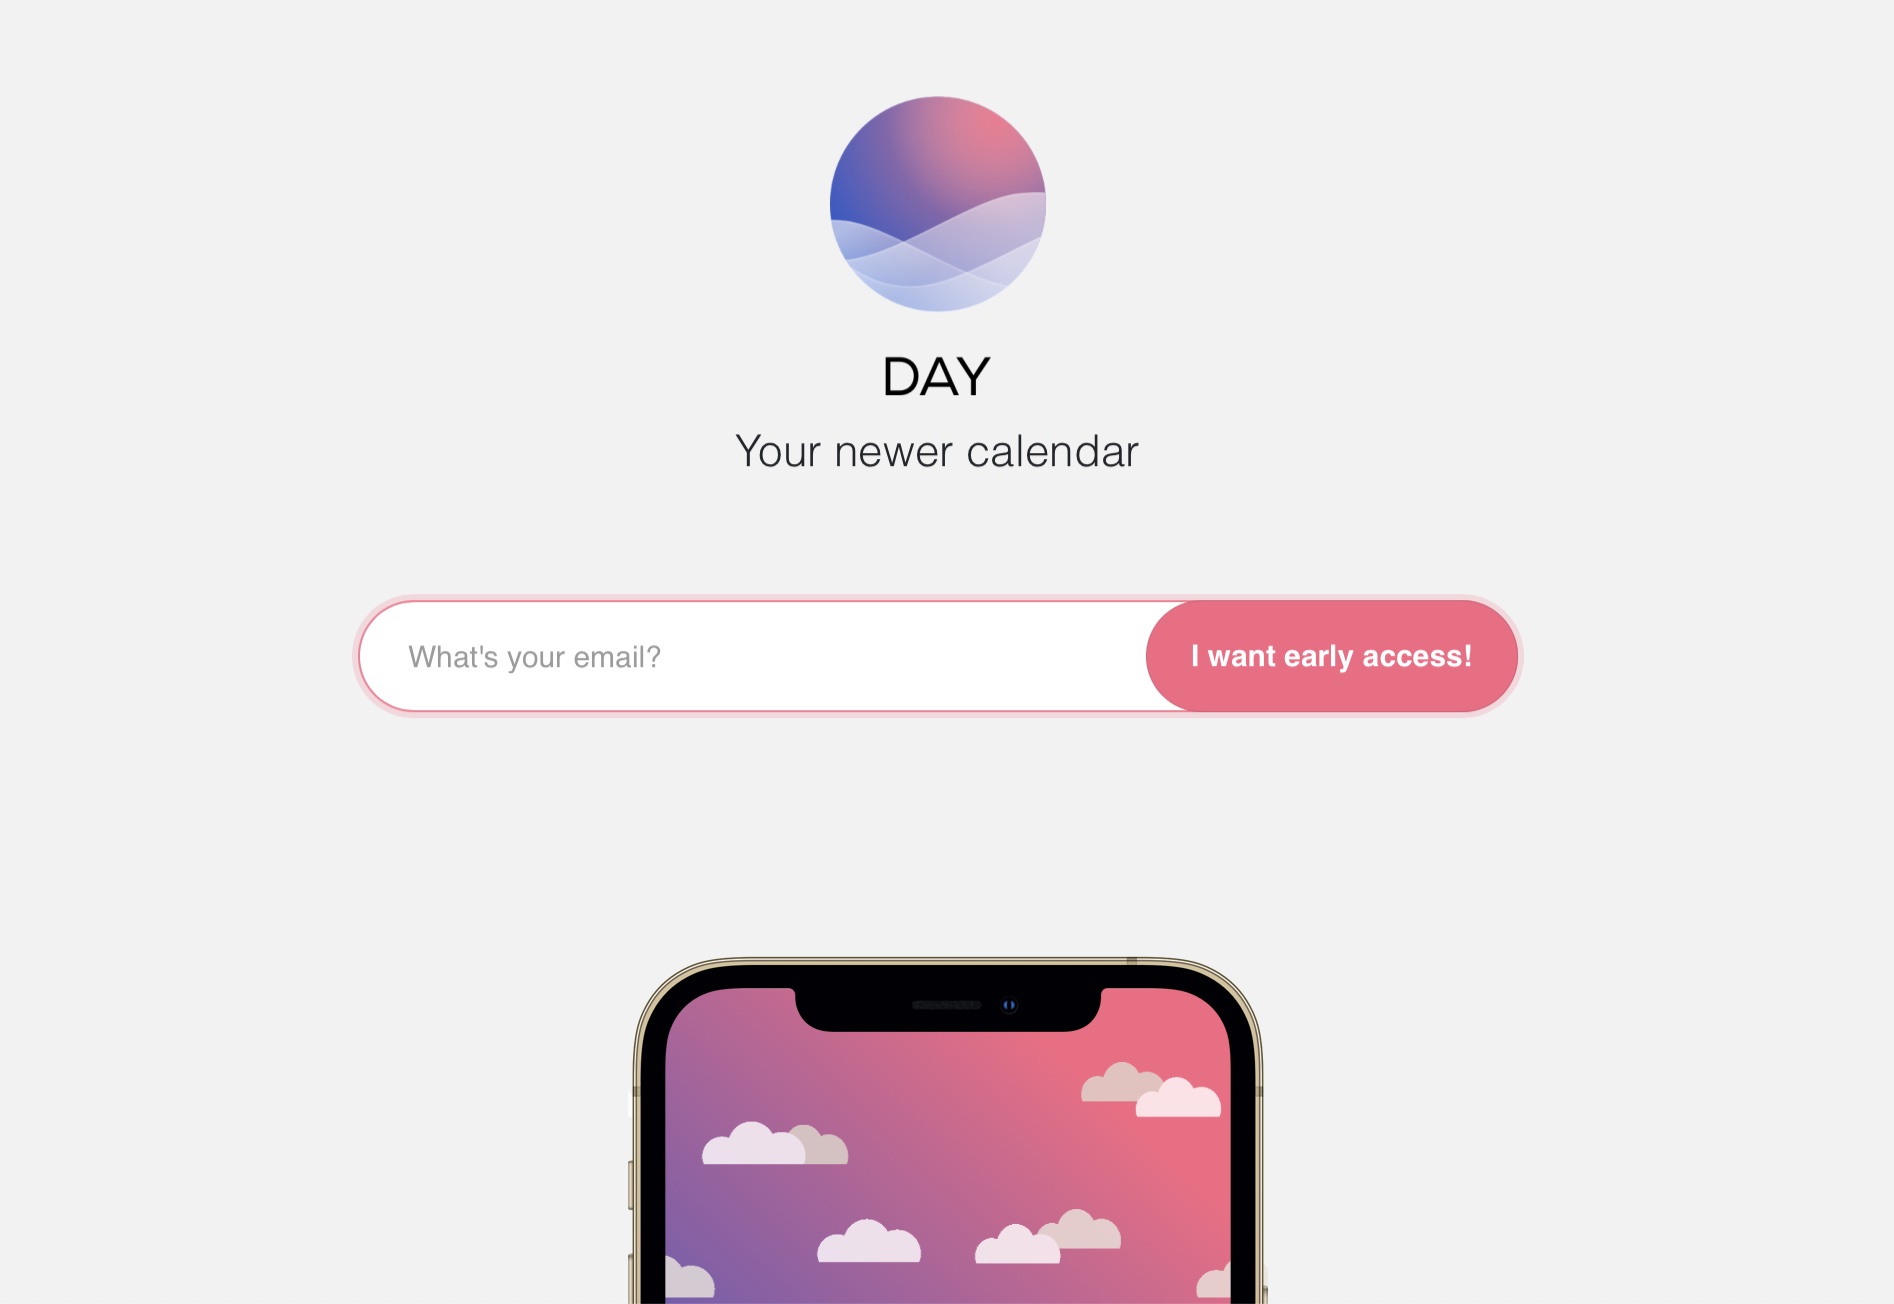 Yahoo has built a new calendar app called Day, and it’s recruited the co-founder of Sunrise to design it